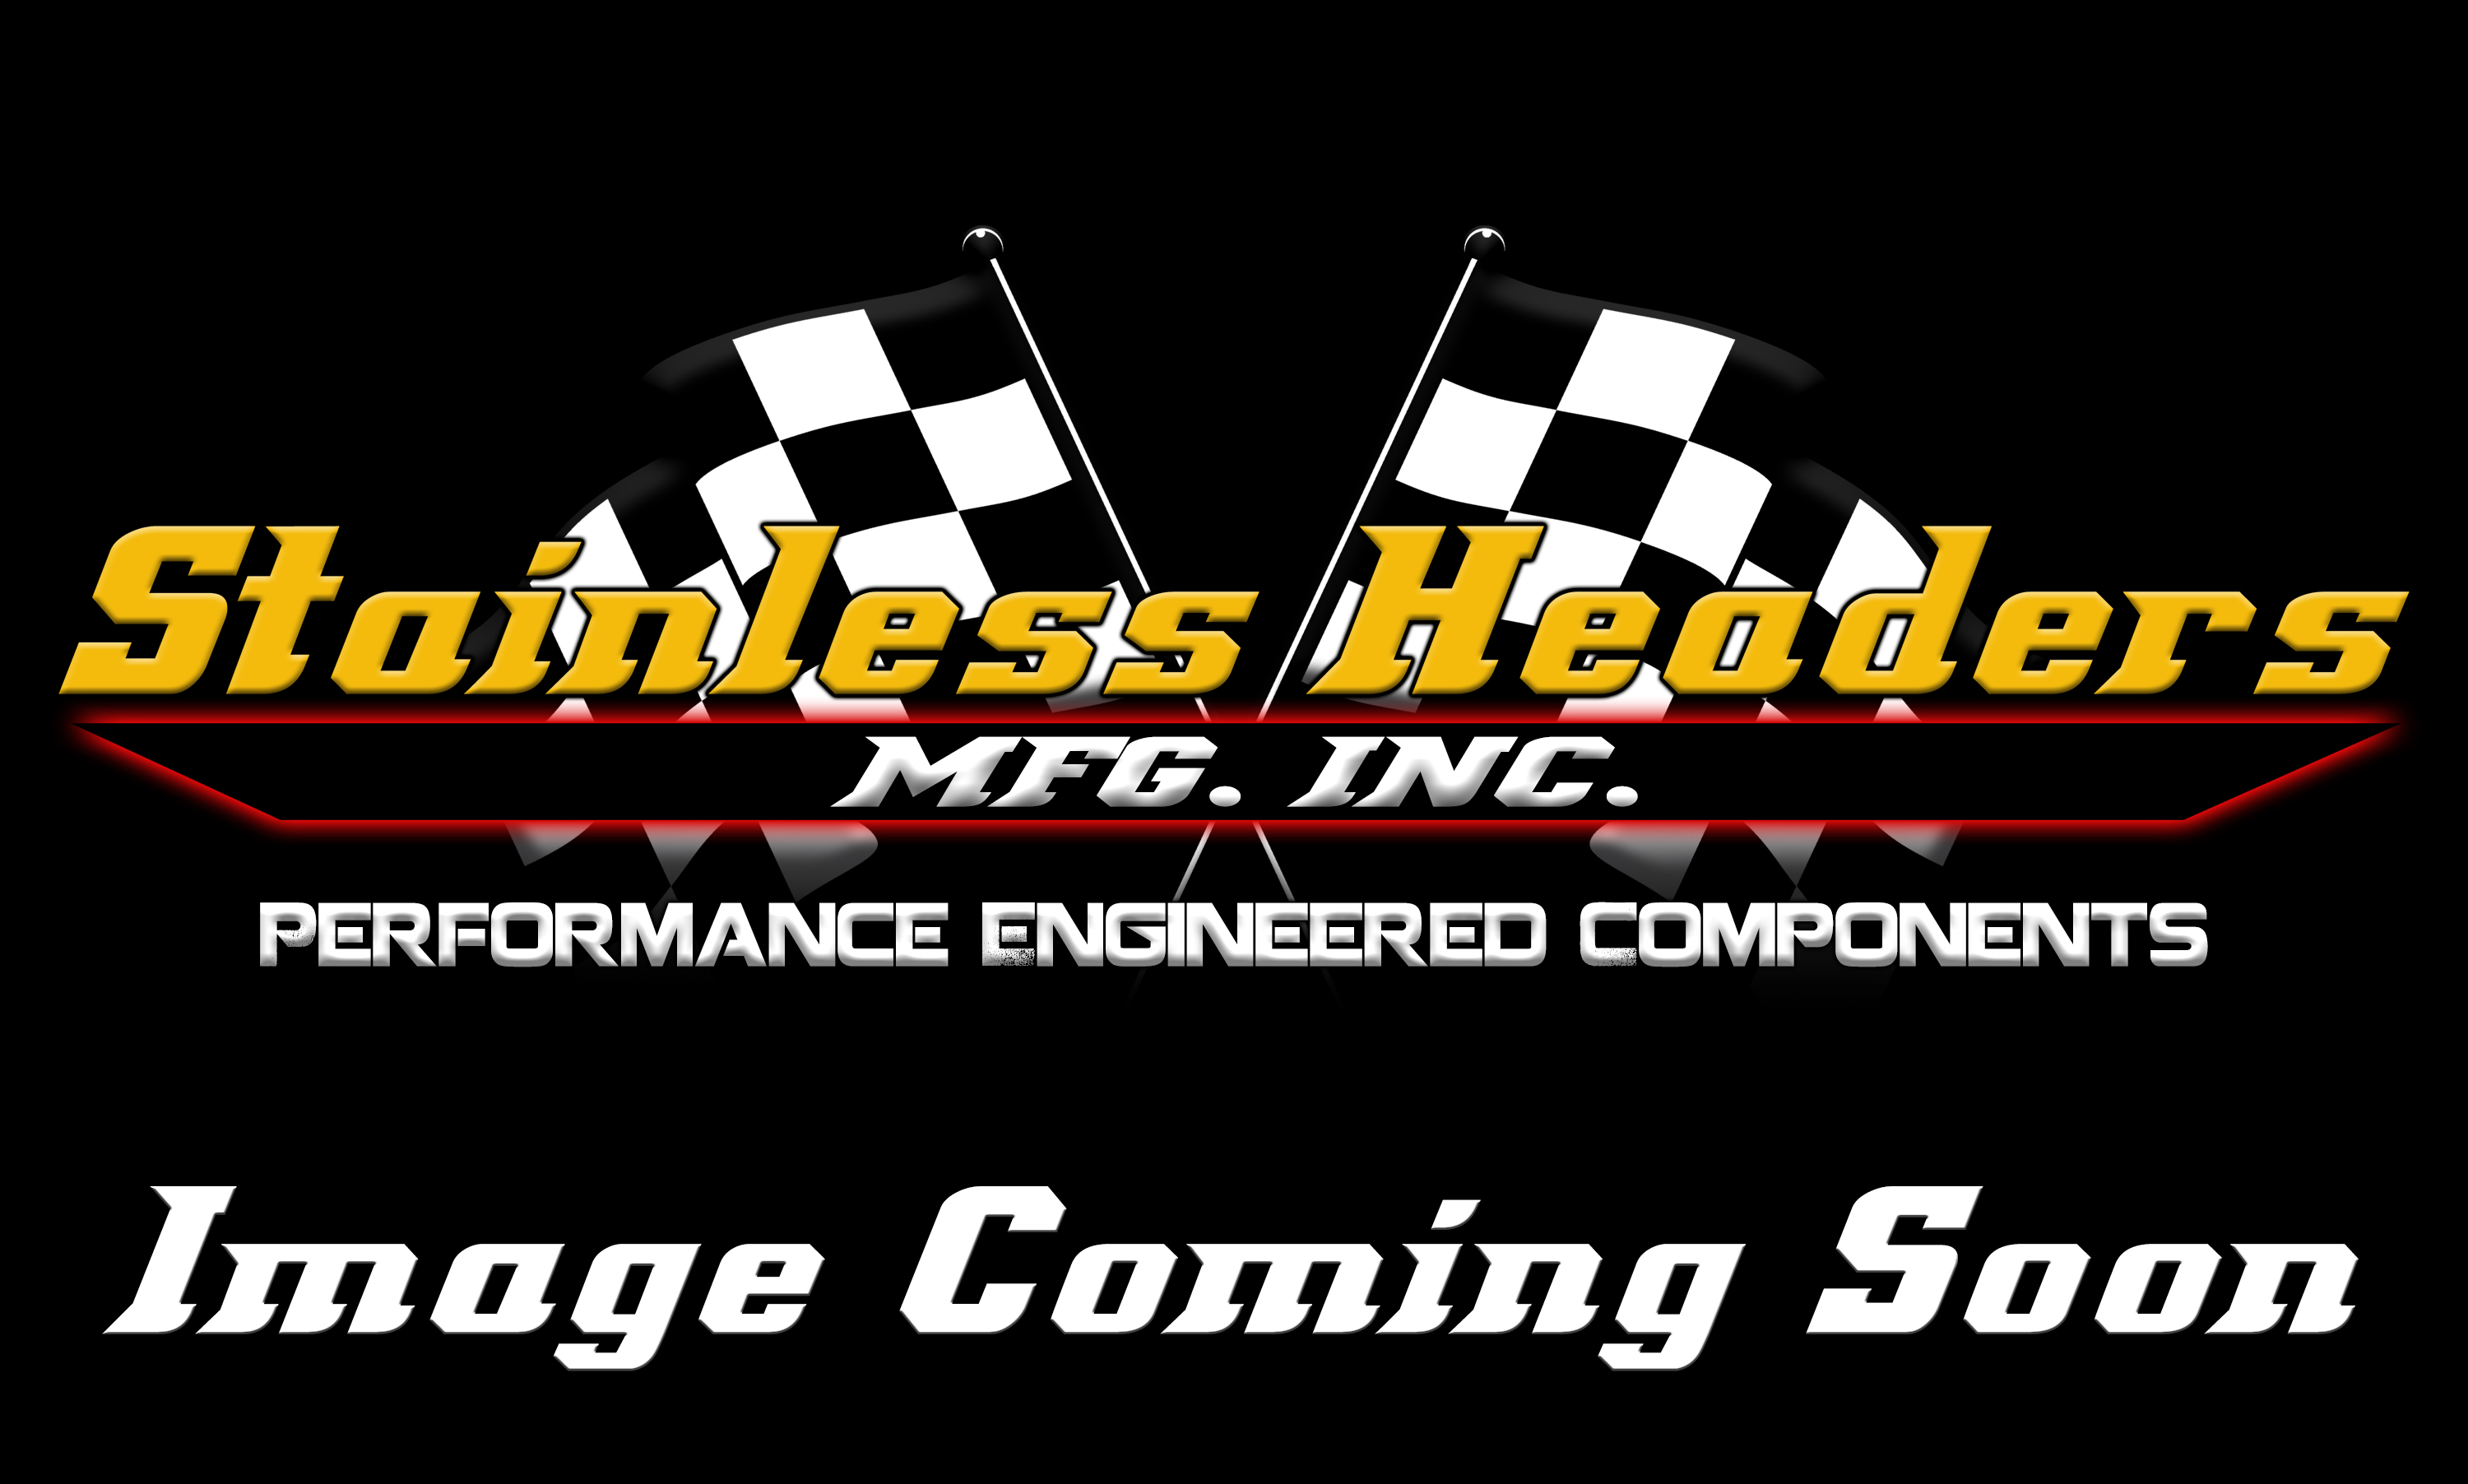 CompTurbo Technology Turbochargers - Comp Turbo Journal Bearing Turbochargers - CompTurbo Technologies - CTR3081S-5858 360 Journal Bearing Turbocharger (650 HP)